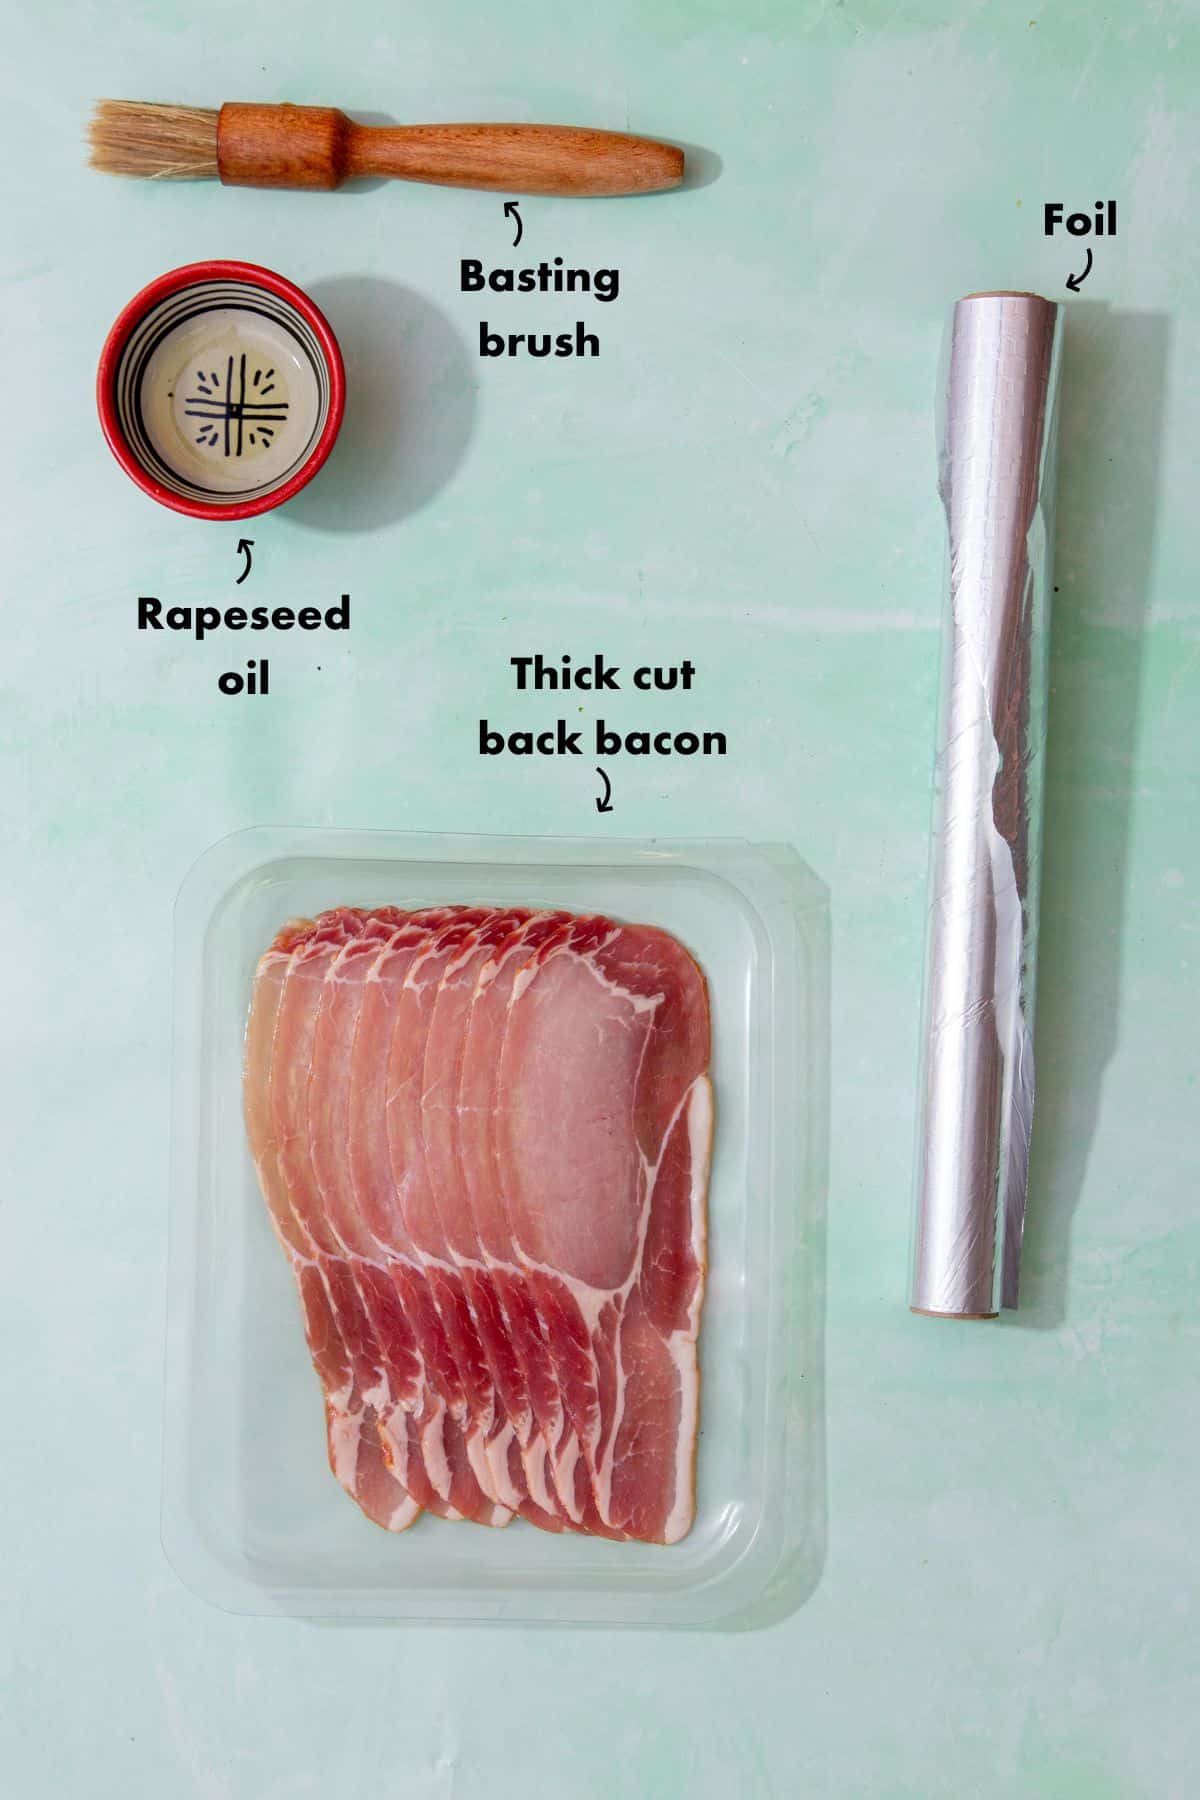 Ingredients and equipment to cook bacon in the airfryer.